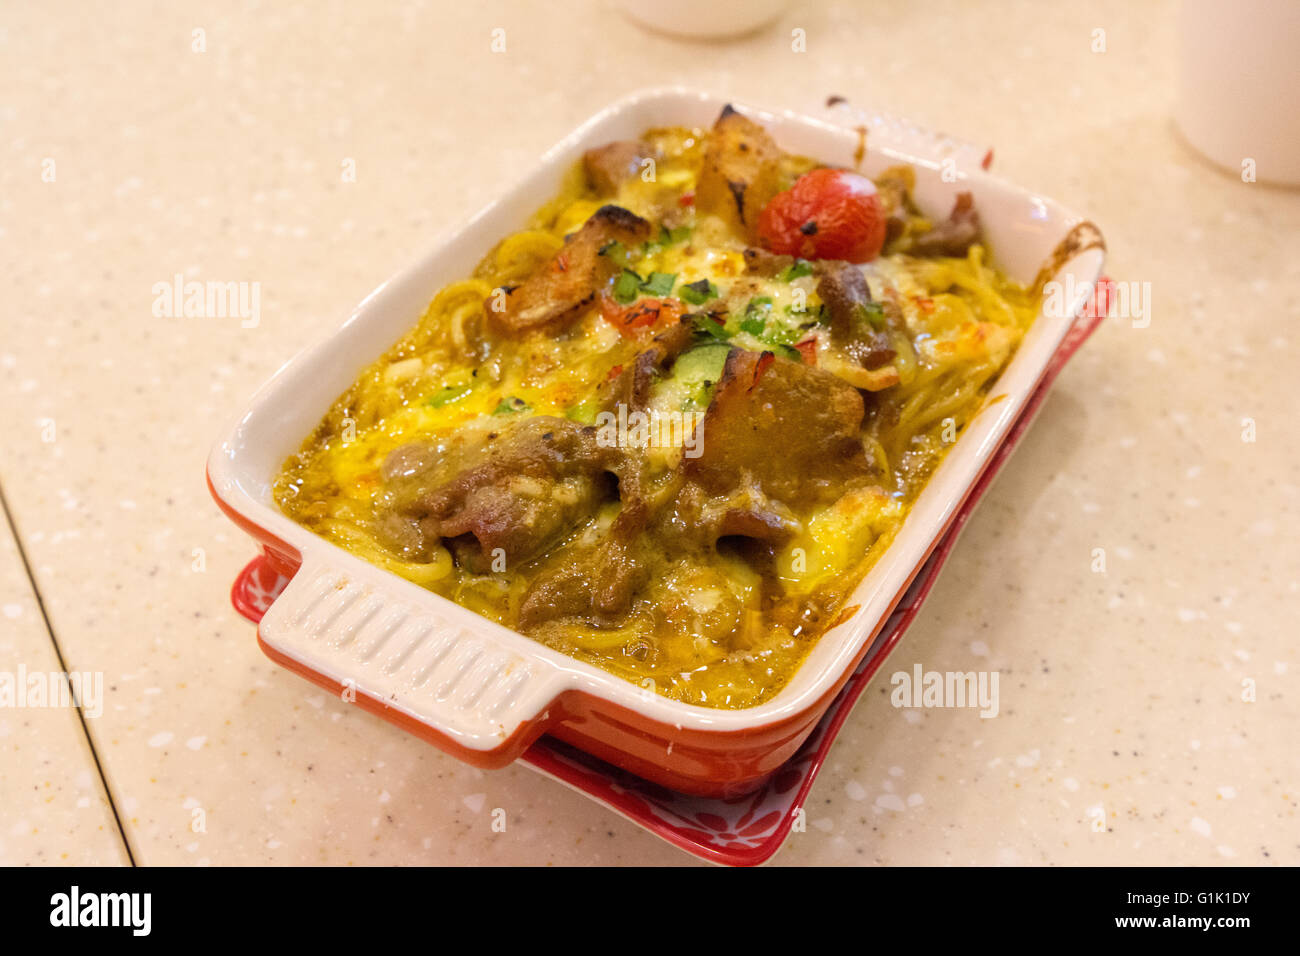 Baked beef and spaghetti in a cheese sauce Stock Photo